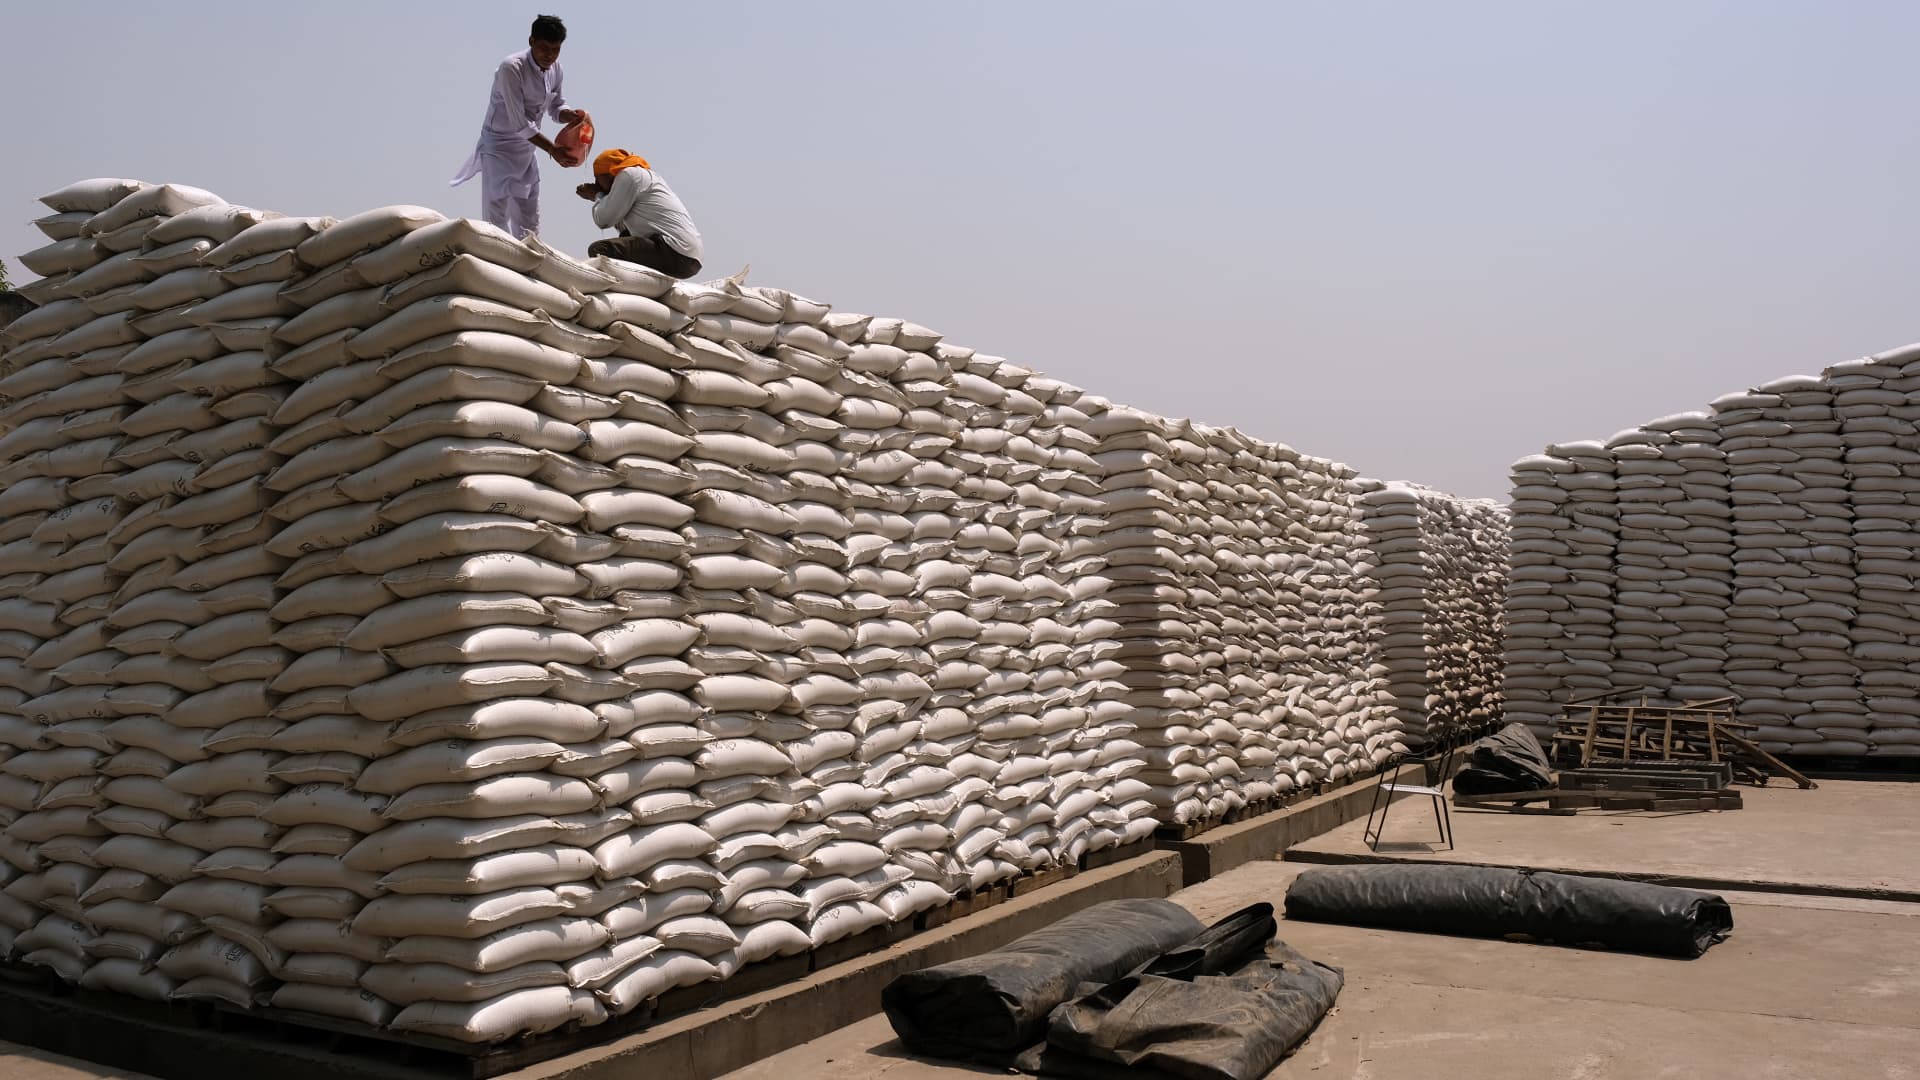 India banned wheat exports with immediate effect on Saturday, just days after saying it was targeting record shipments this year, as a scorching heatw